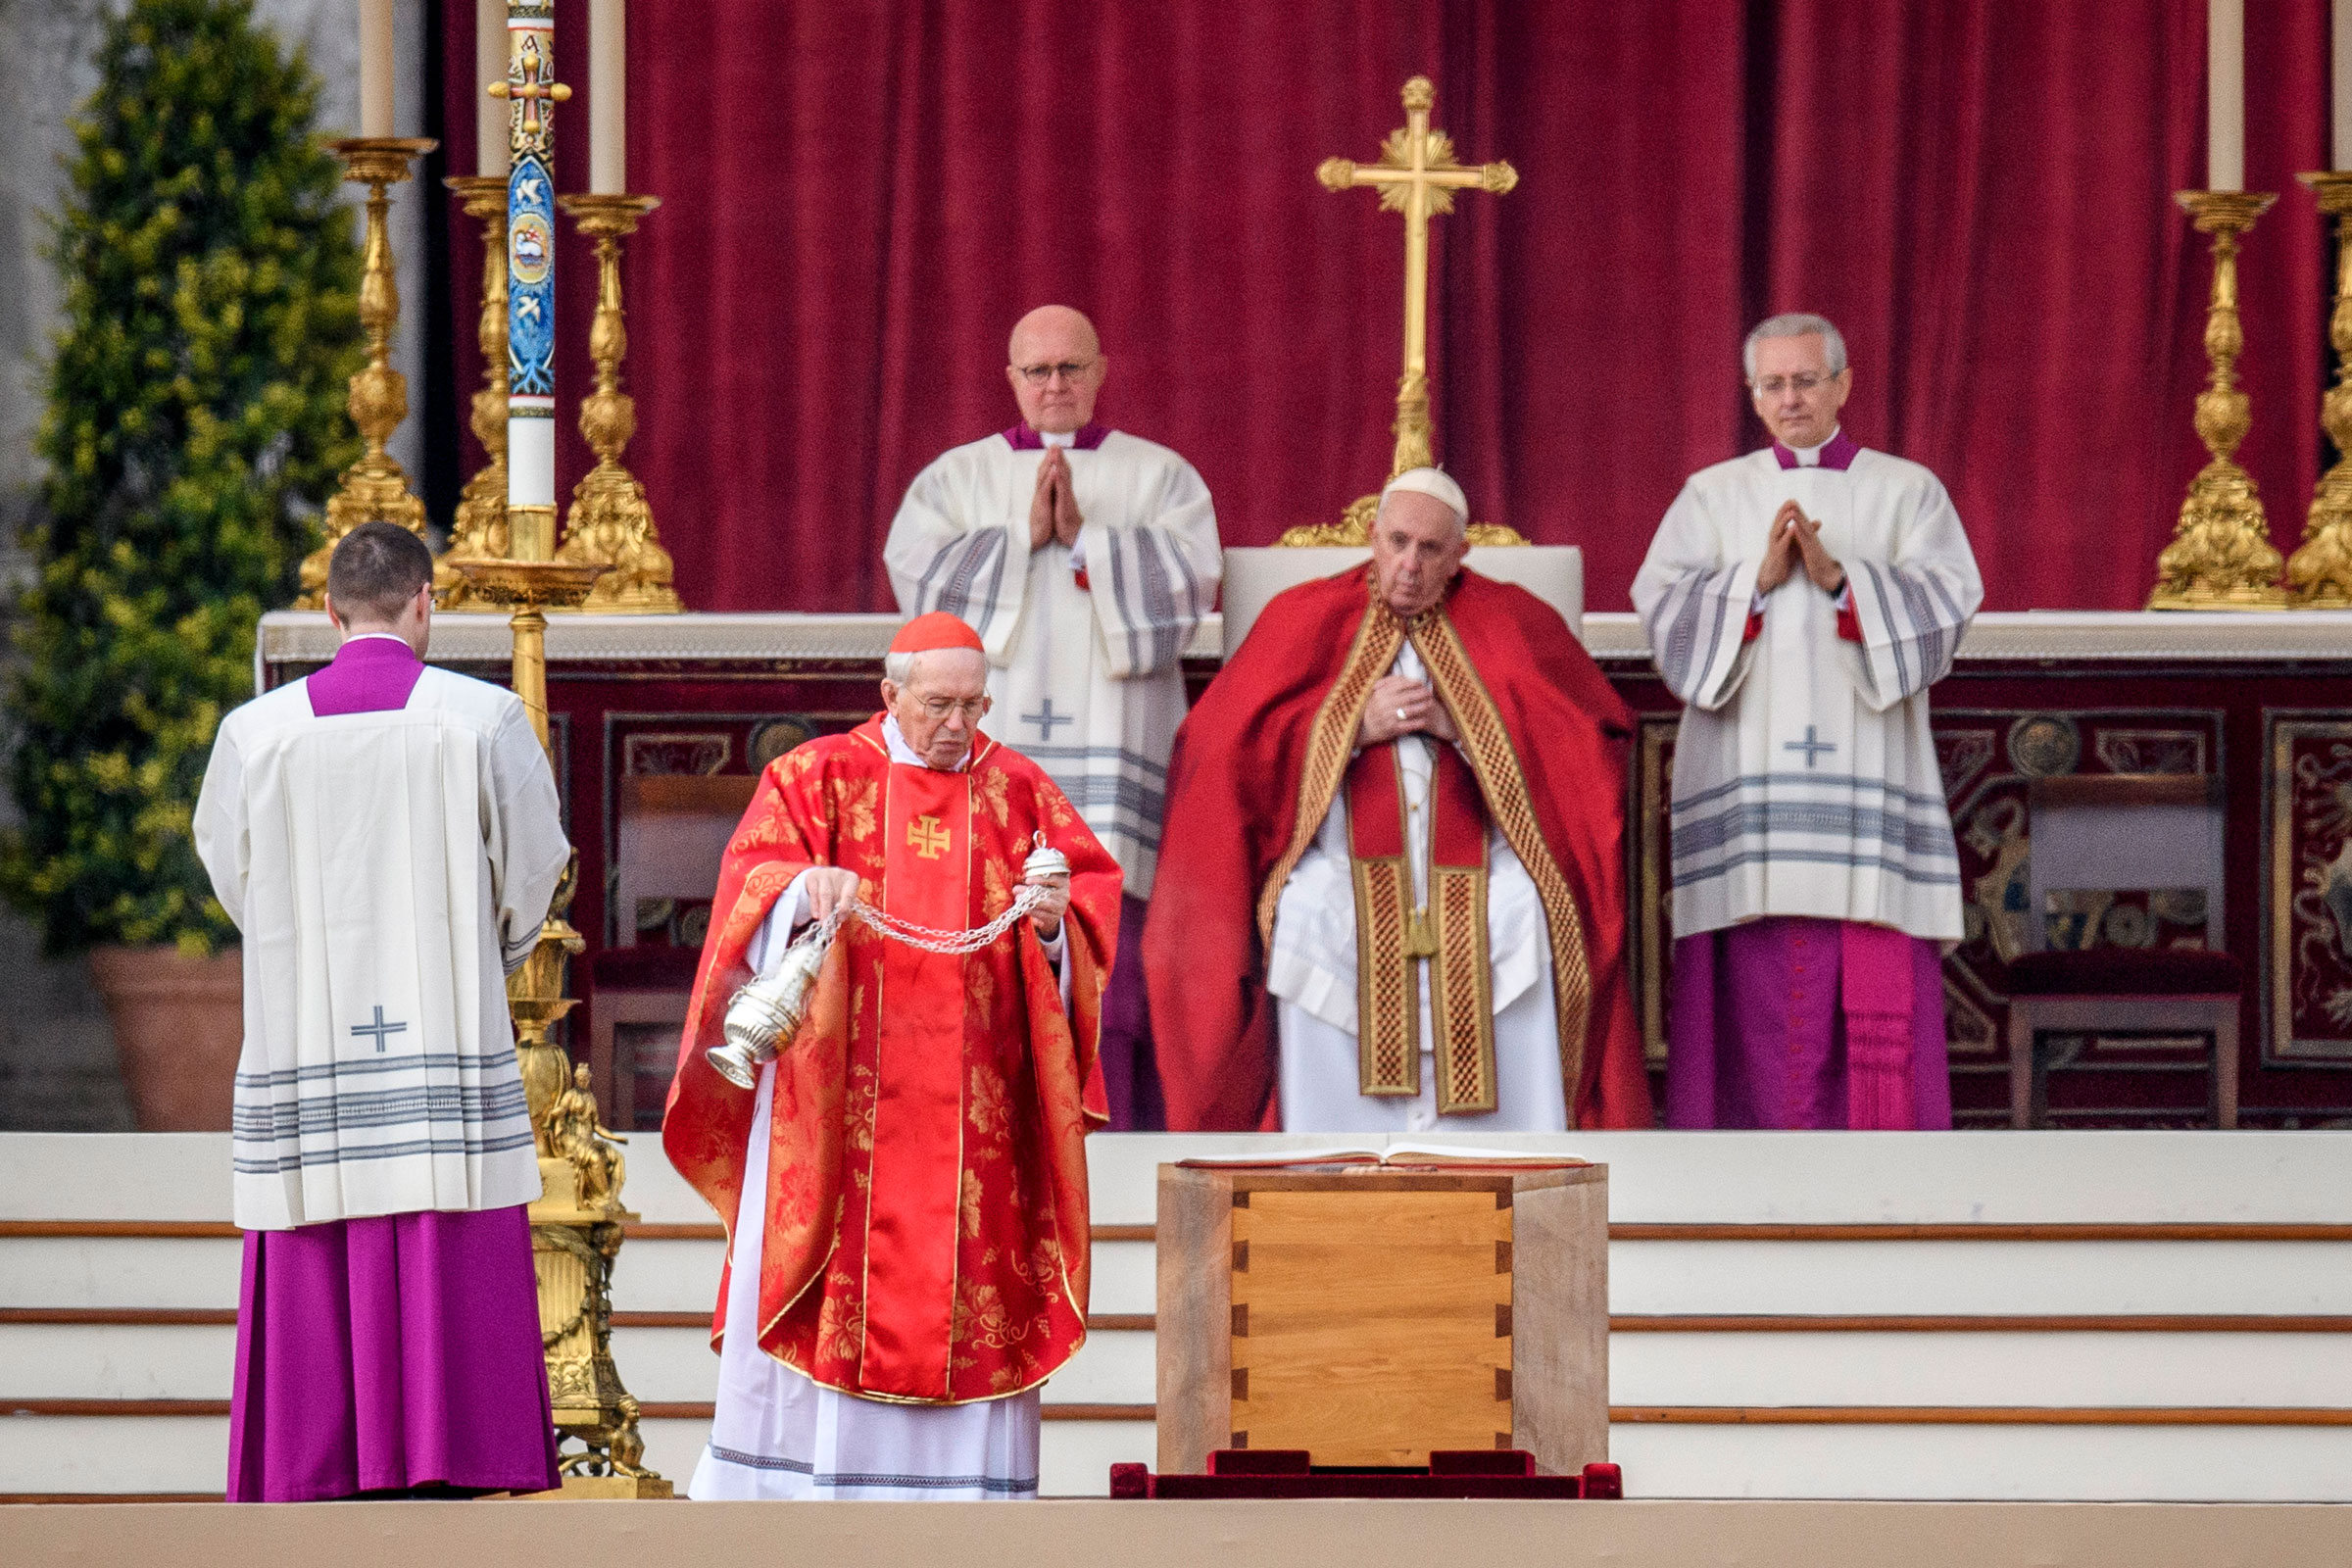 Cardinal Giovanni Battista Re swings a thurible of incense on the coffin of Pope Emeritus Benedict XVI during the funeral mass at St. Peter's square on Jan. 5, 2023 in Vatican City. (Antonio Masiello—Getty Images)